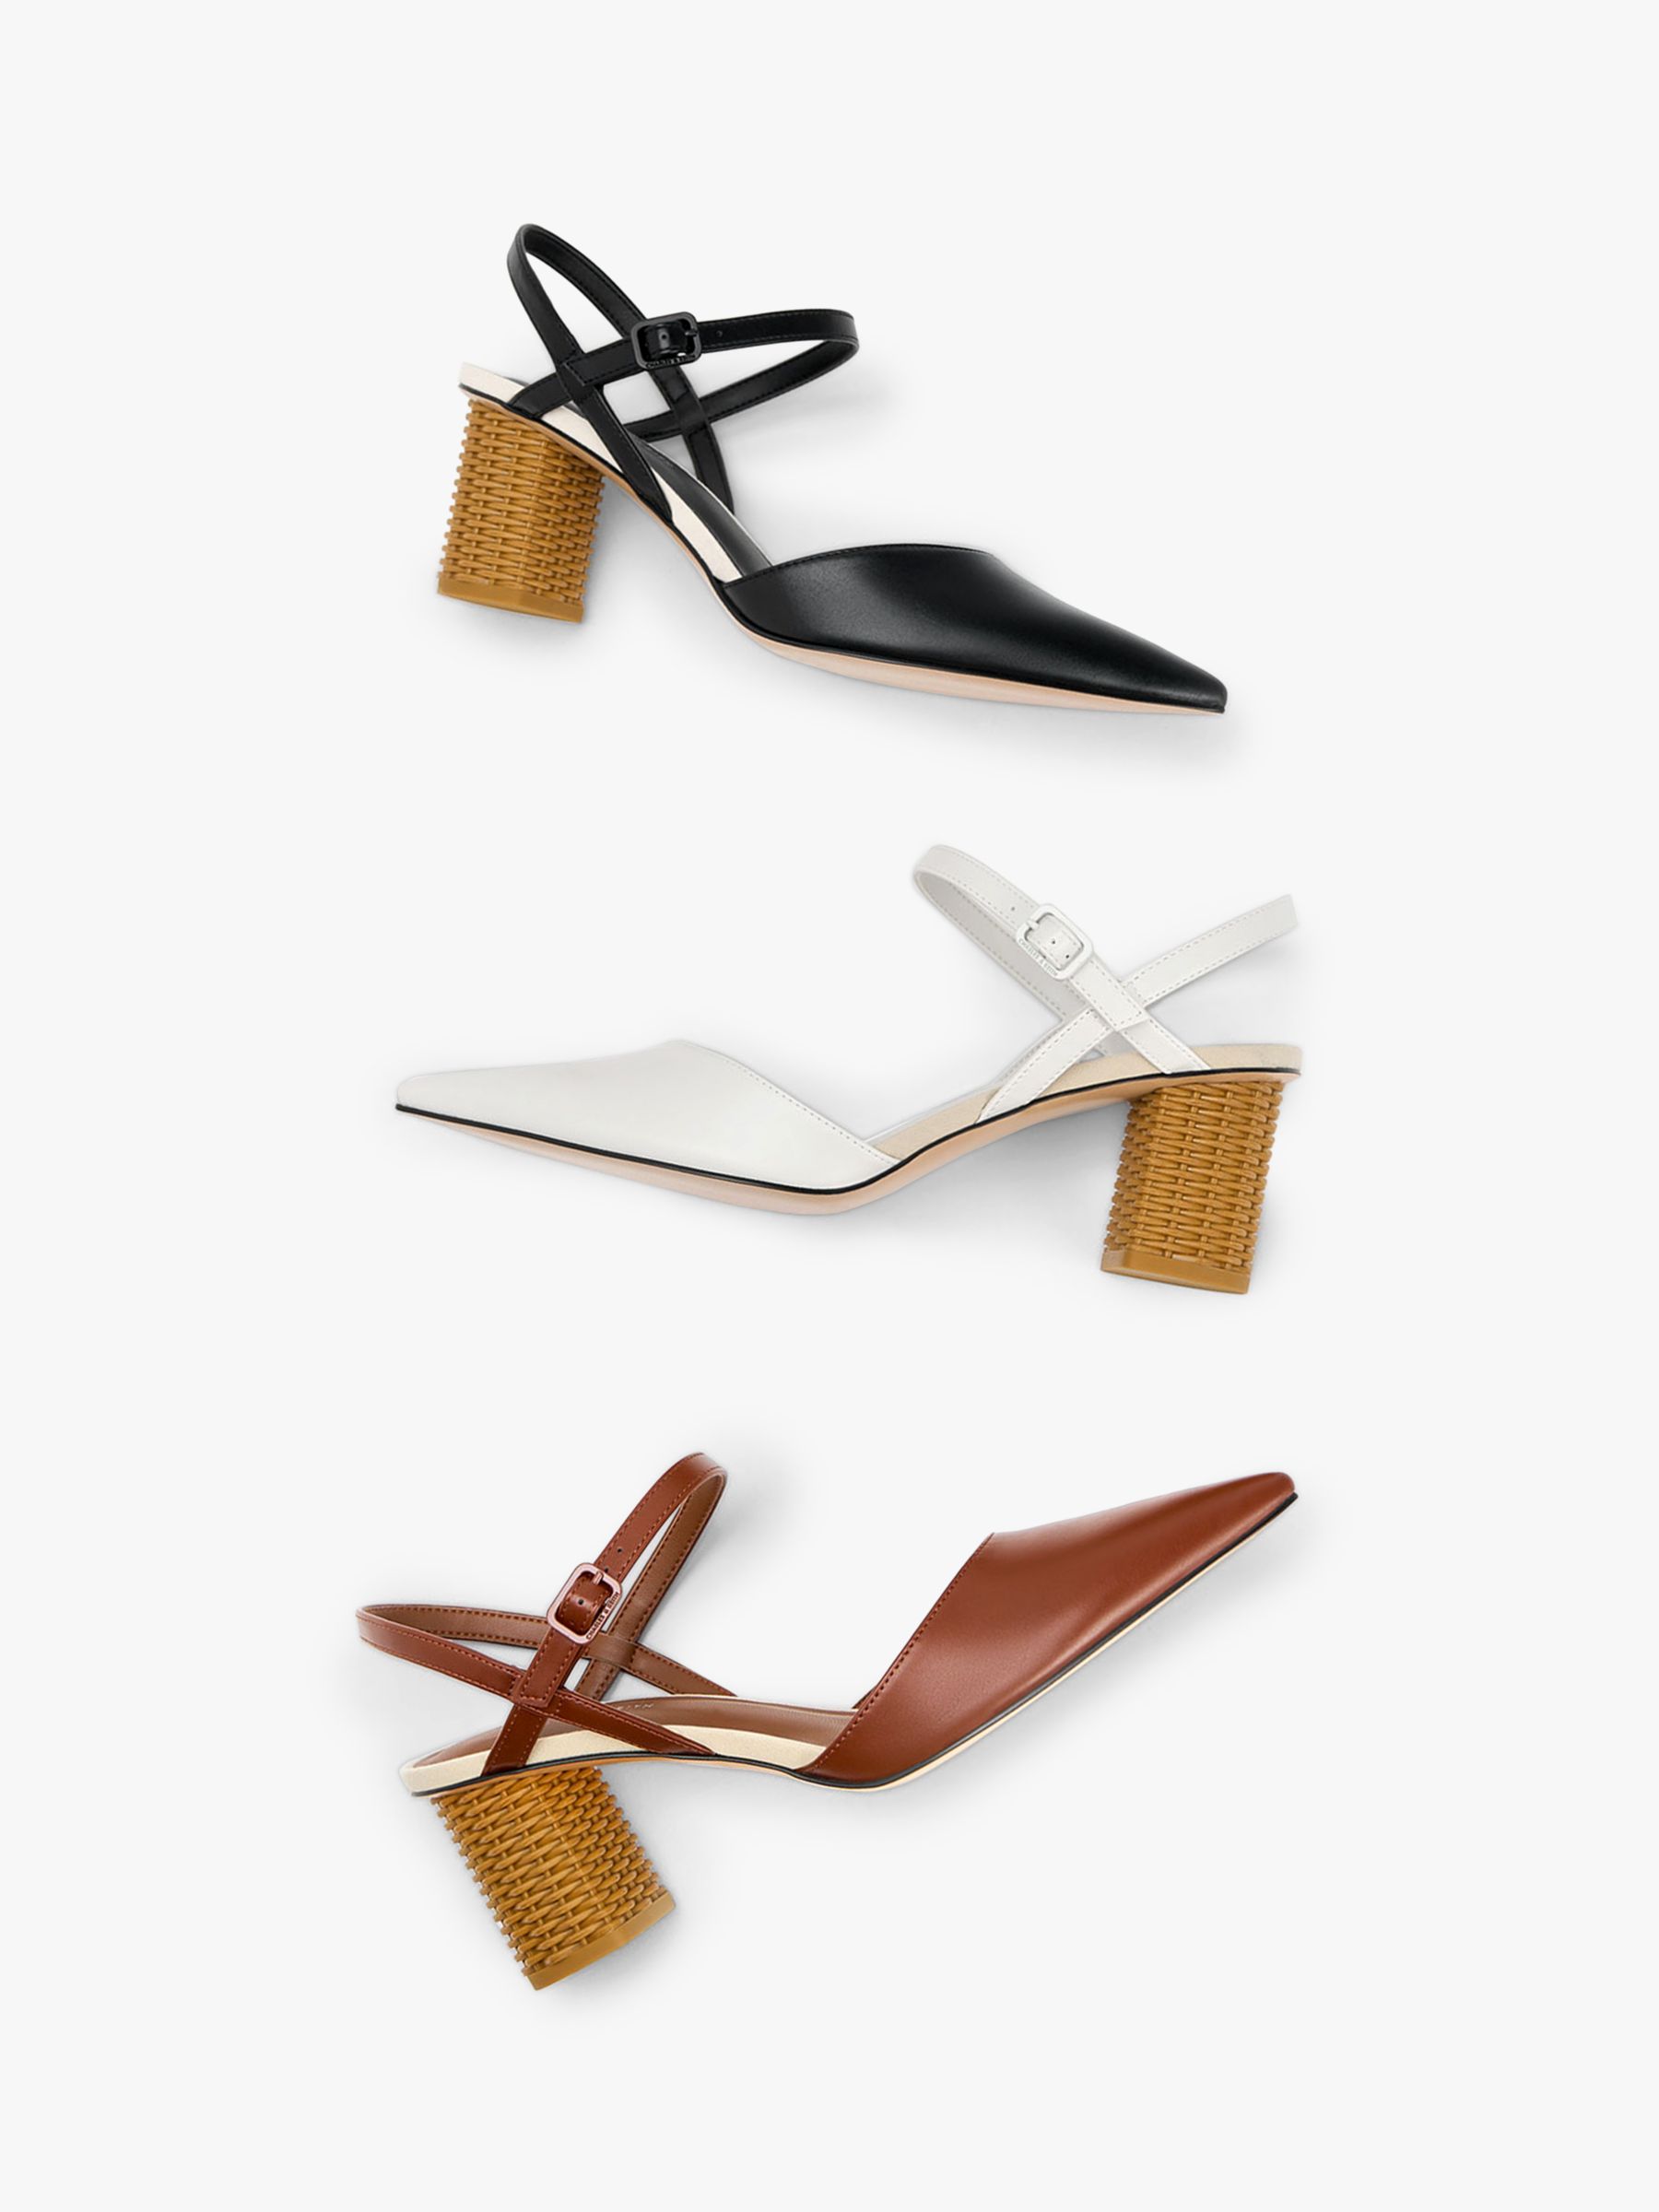 18 Pairs of Charles and Keith Shoes a Stylist Recommends